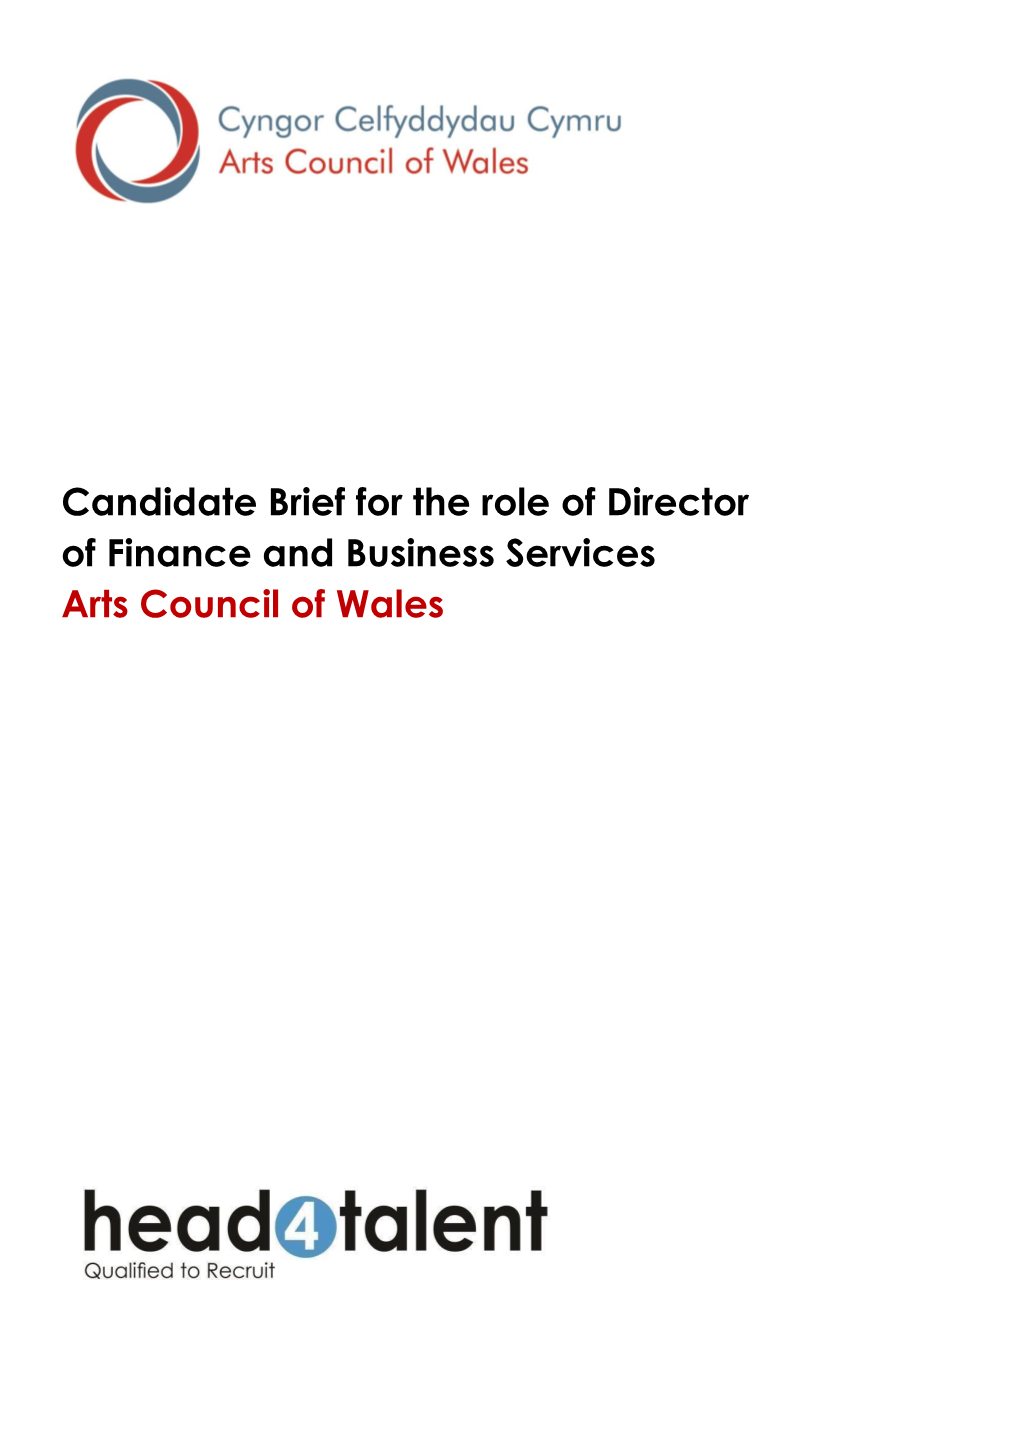 Candidate Brief for the Role of Director of Finance and Business Services Arts Council of Wales